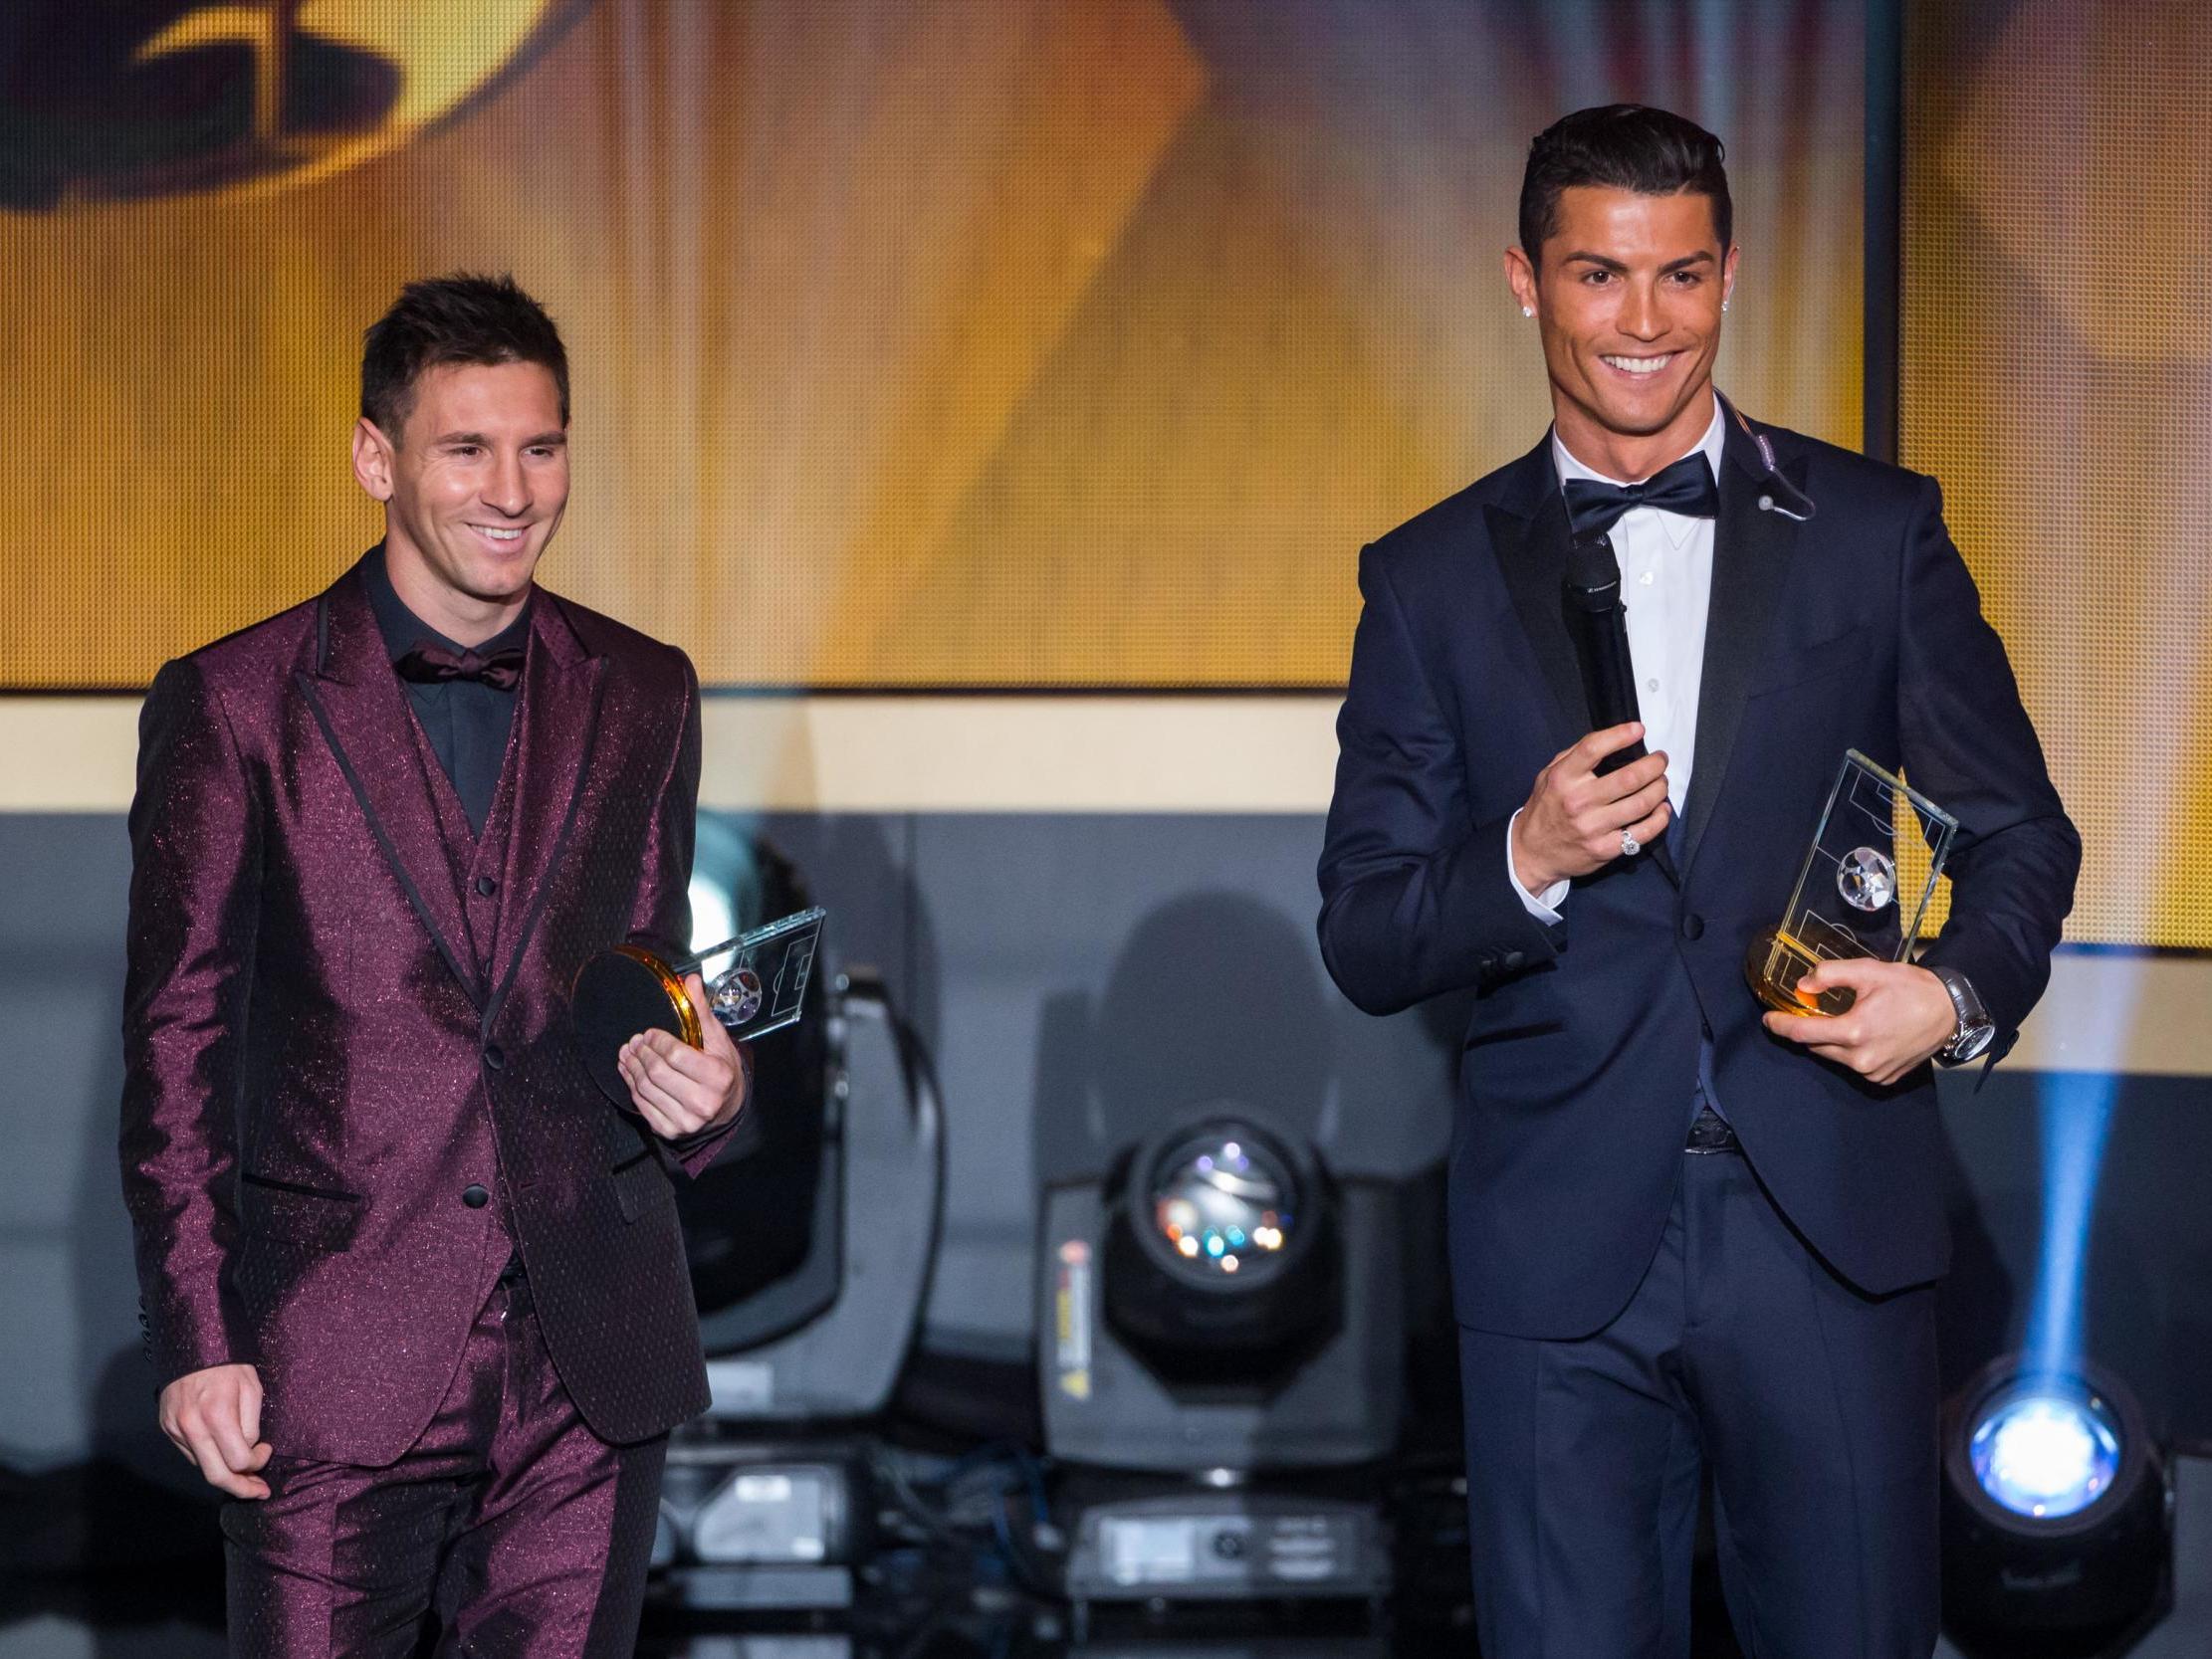 Lionel Messi opens up on rivalry with Cristiano Ronaldo, The Independent